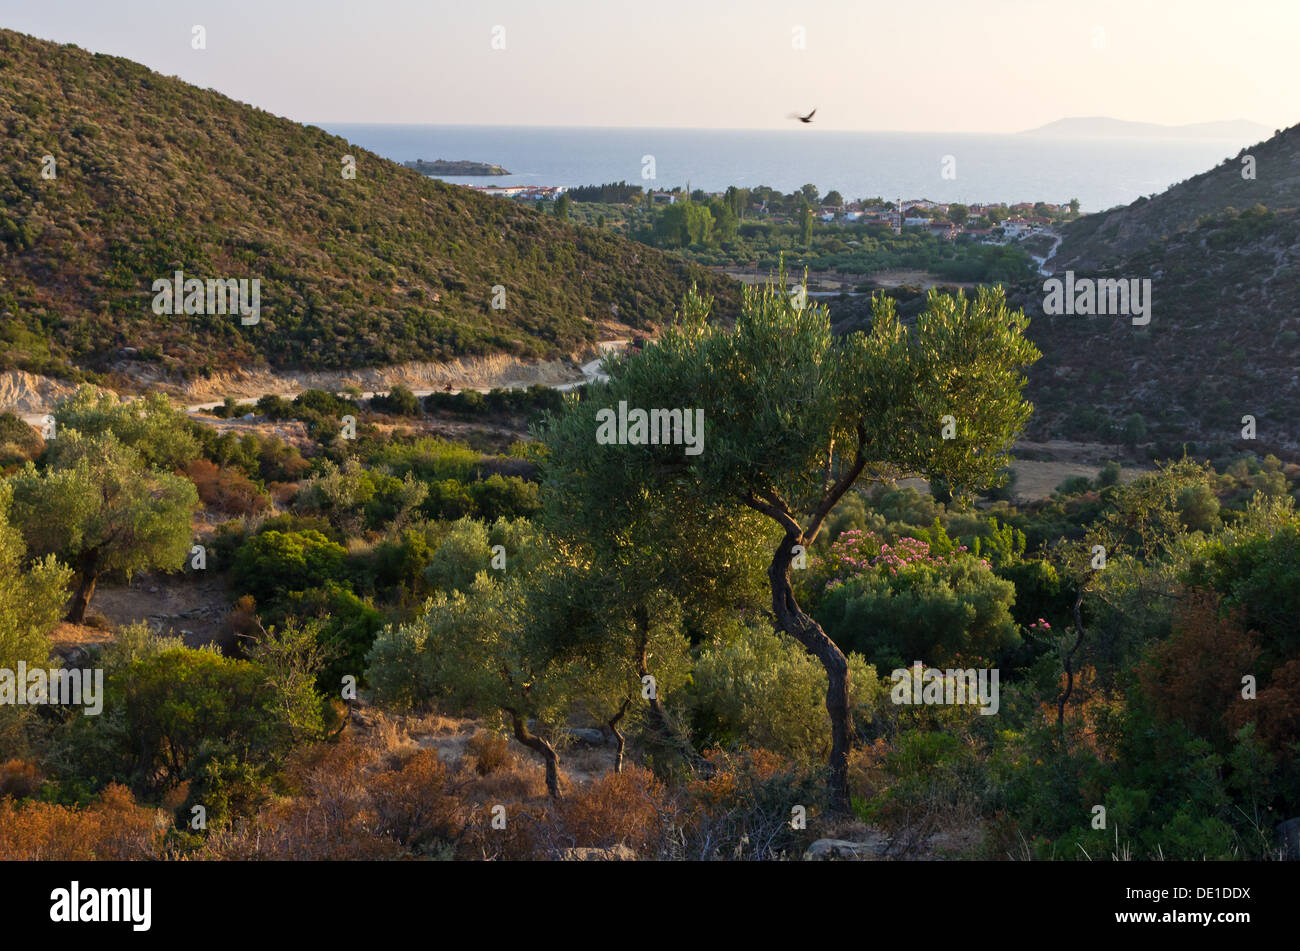 Mountain roads, olive trees, seagulls and islands in Macedonia, Greece Stock Photo